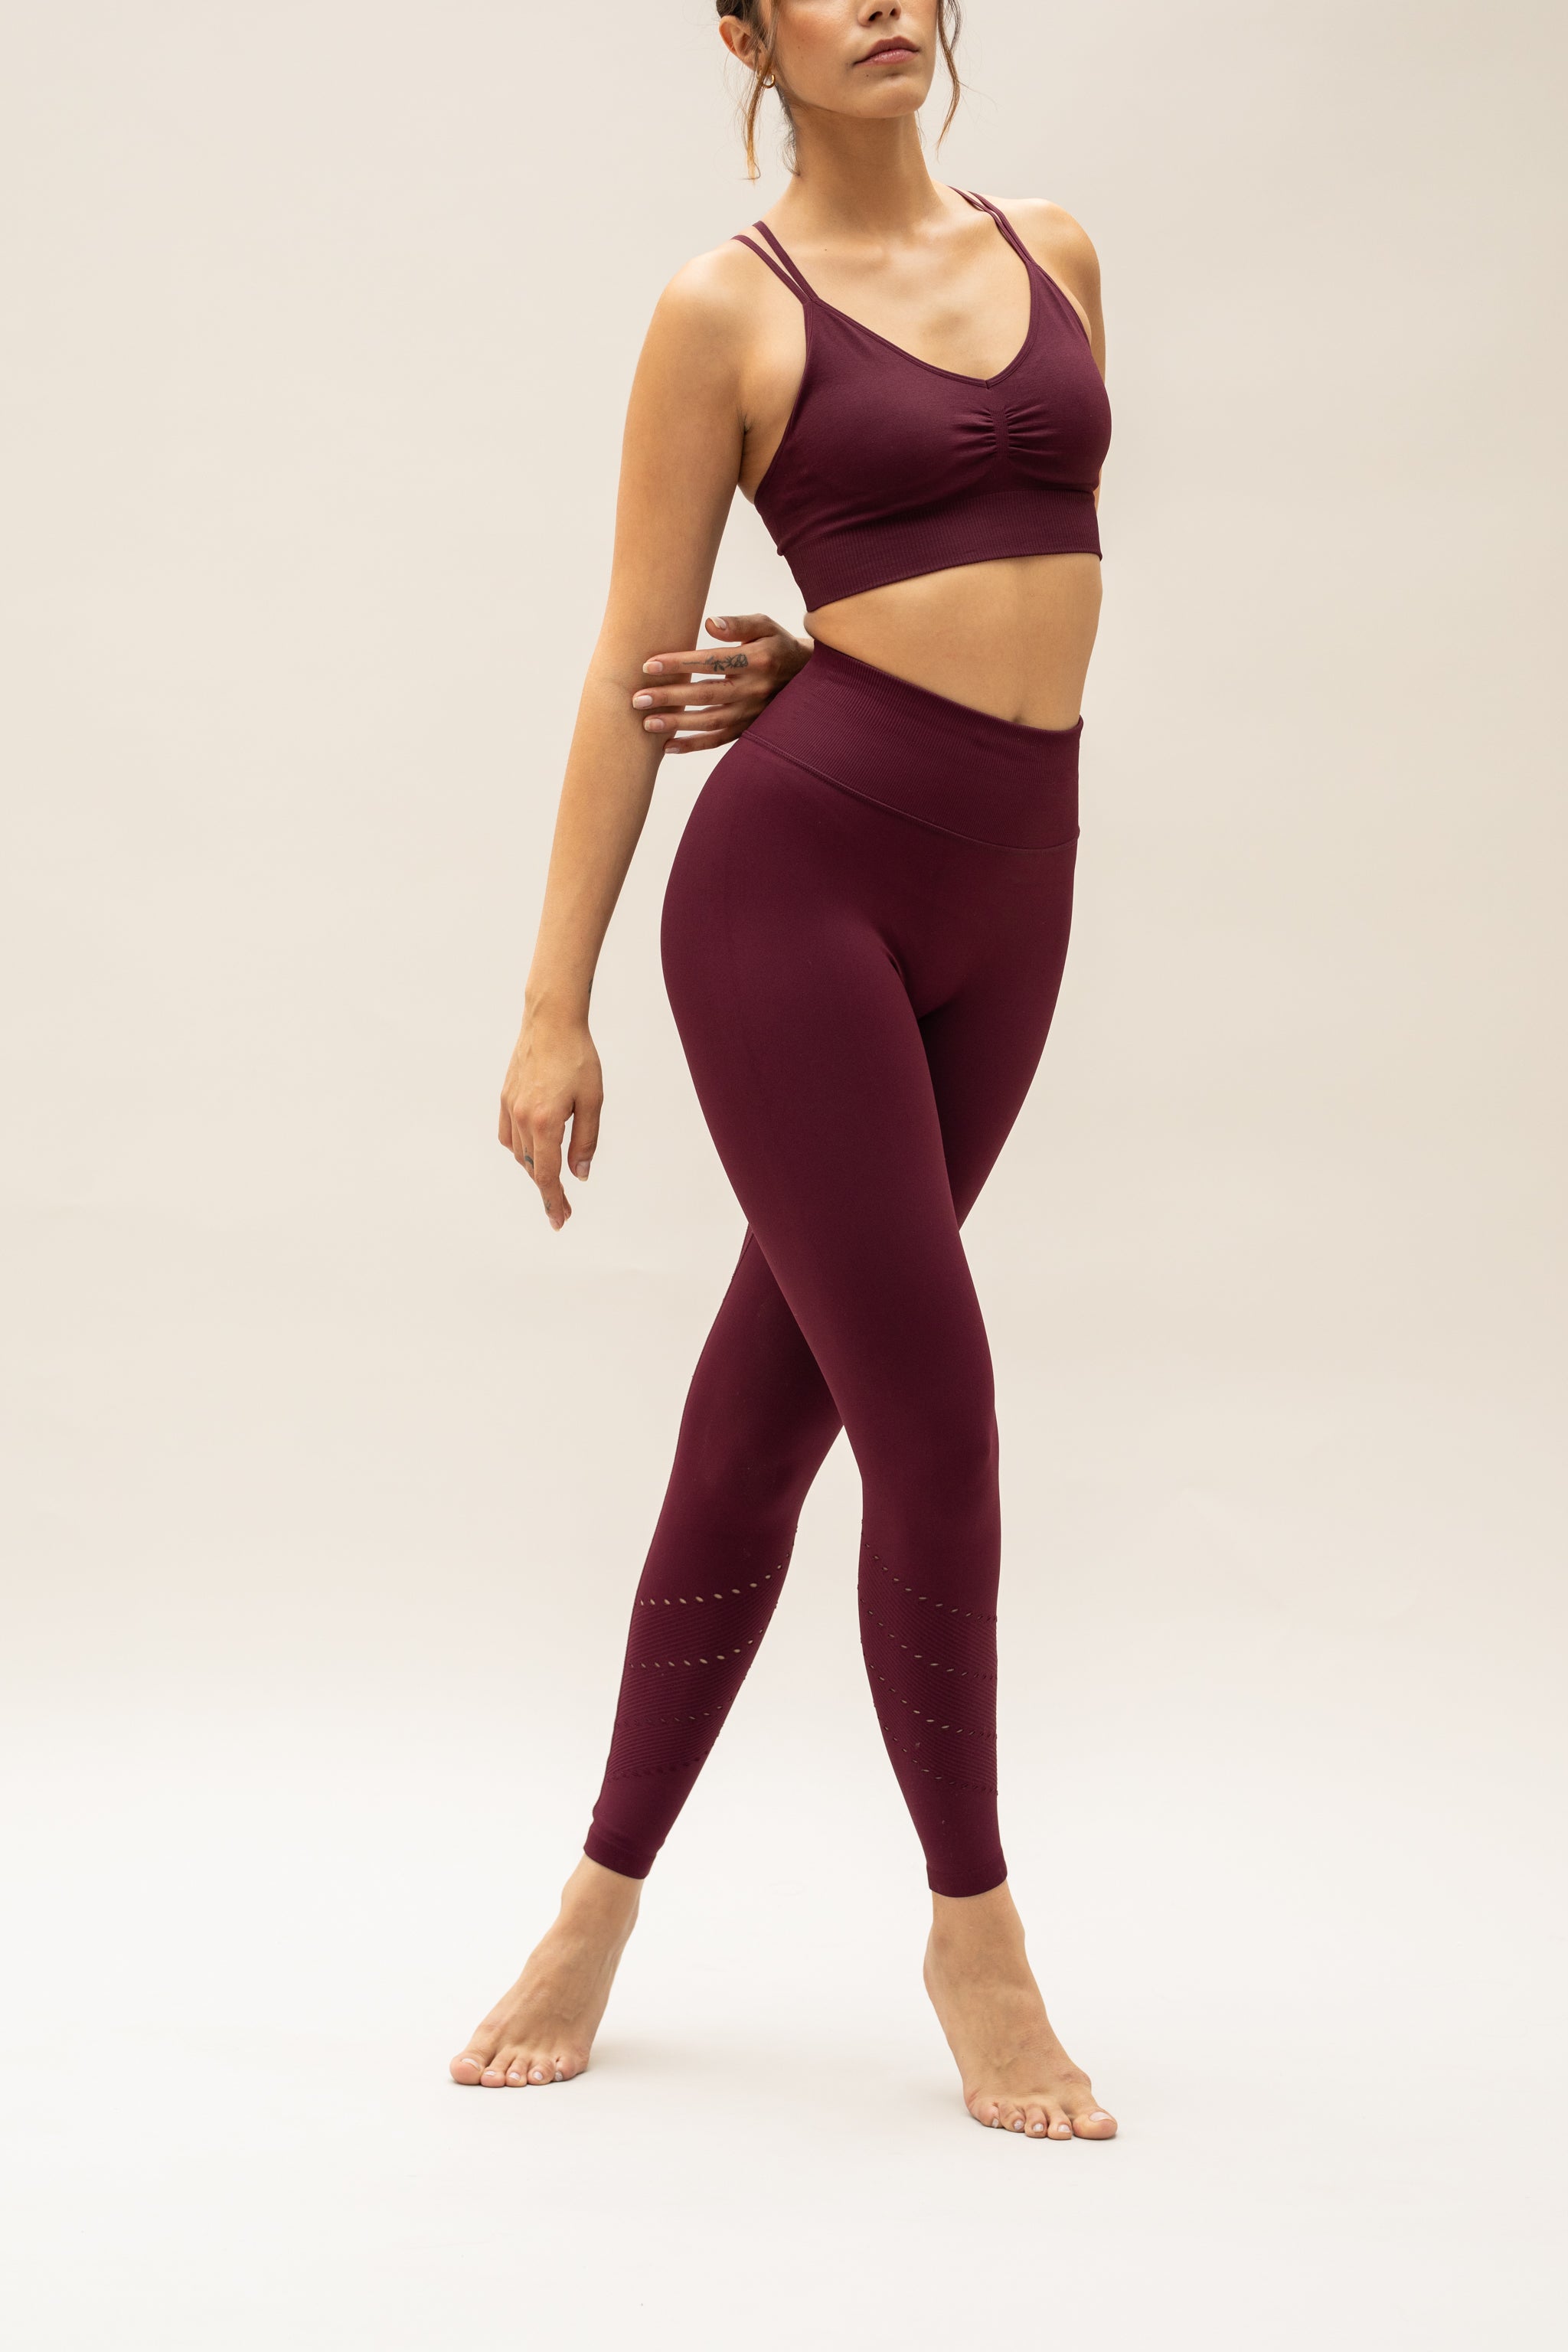 Purple red leggings and purple red bra for women by sustainable activewear brand Jilla. 